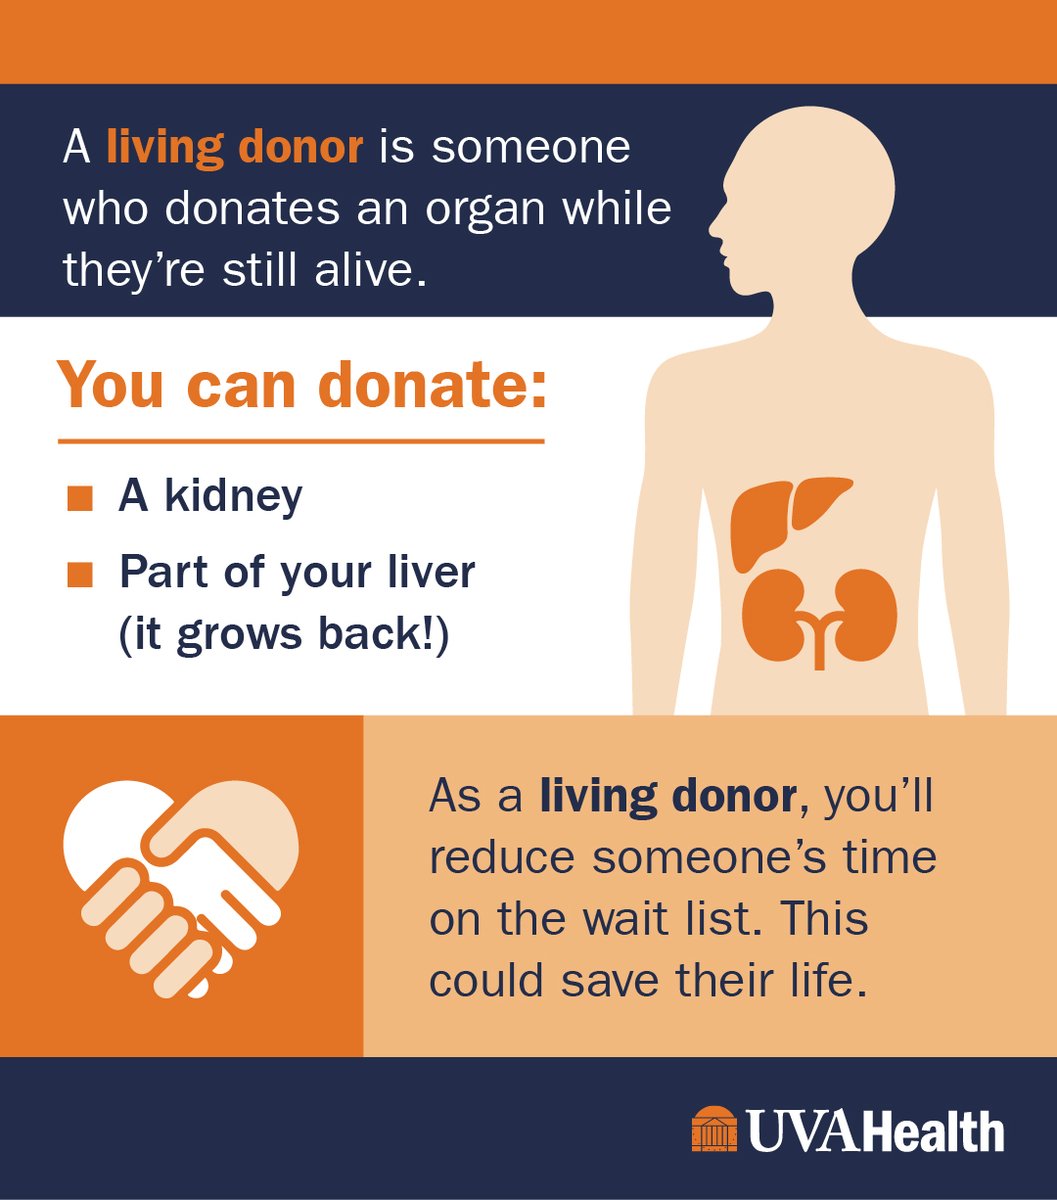 Living donors can donate a kidney or part of their liver. You'll reduce someone's time on the wait list, which could save their life. Learn more and sign up to be a living donor: bit.ly/4d1m1IG @uvatransplant @donatelifeva #LivingDonor #DonateLifeMonth